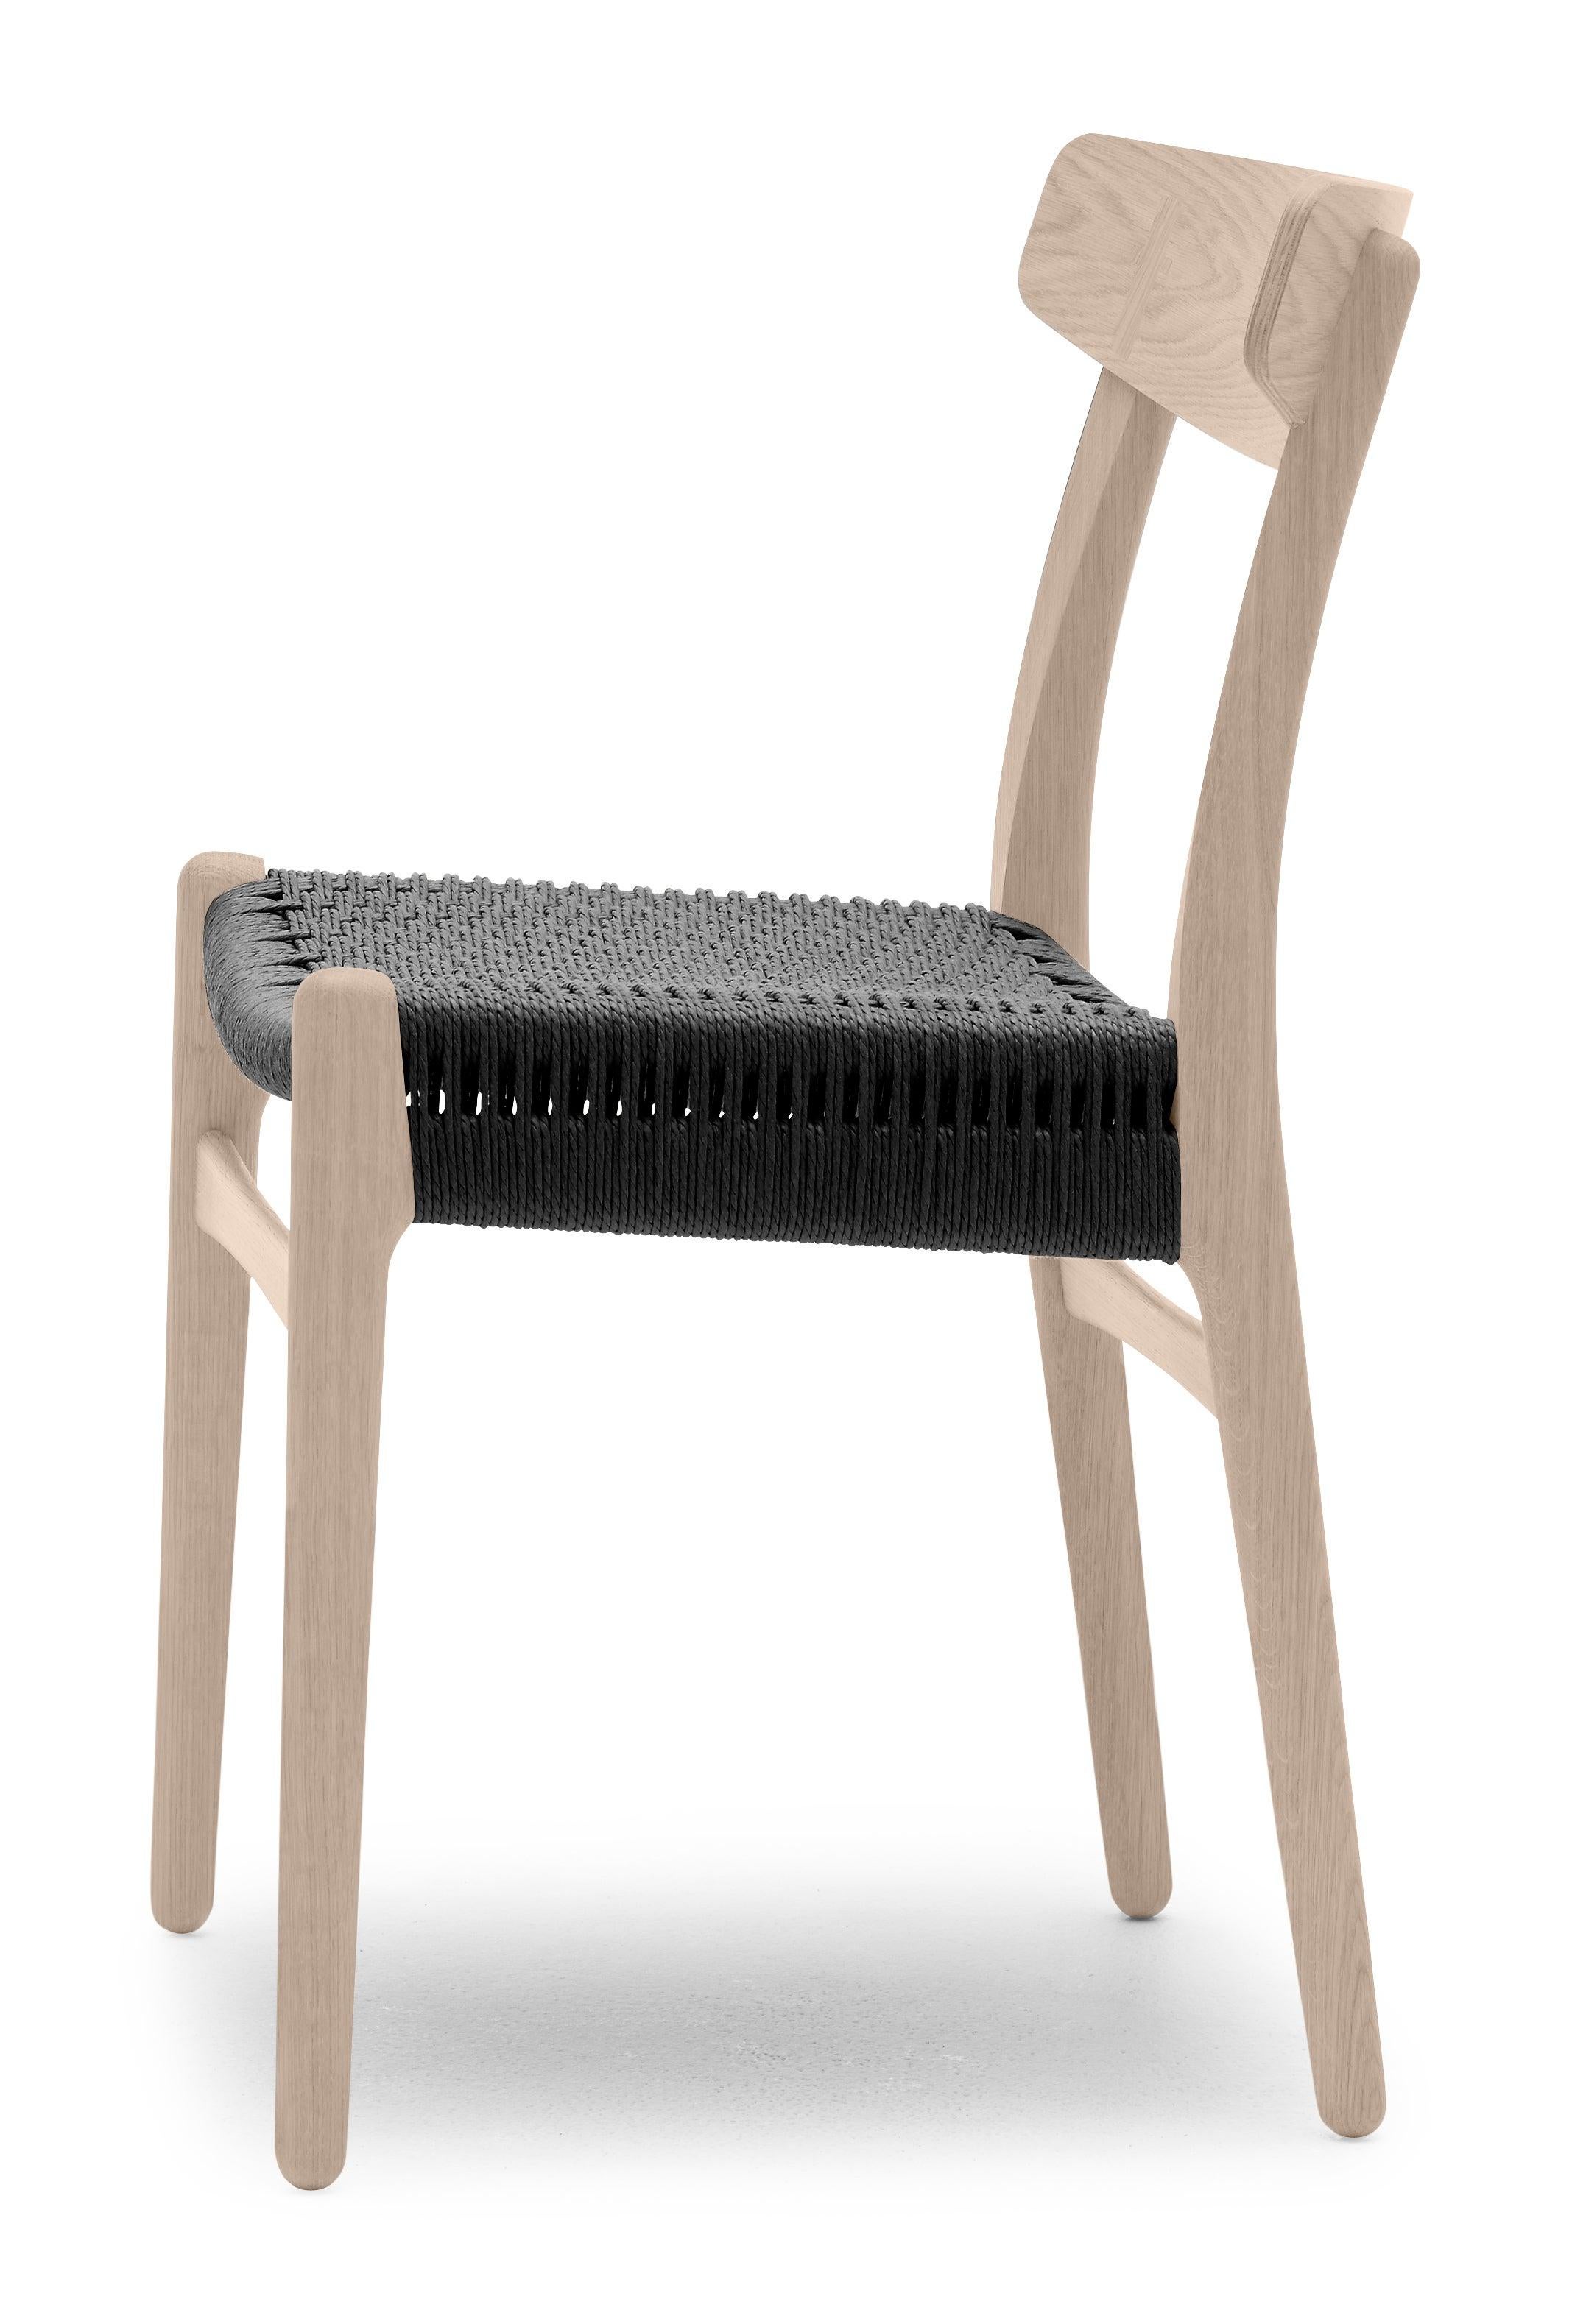 Modern CH23 Dining Chair in Oak Soap with Black Papercord Seat by Hans J. Wegner